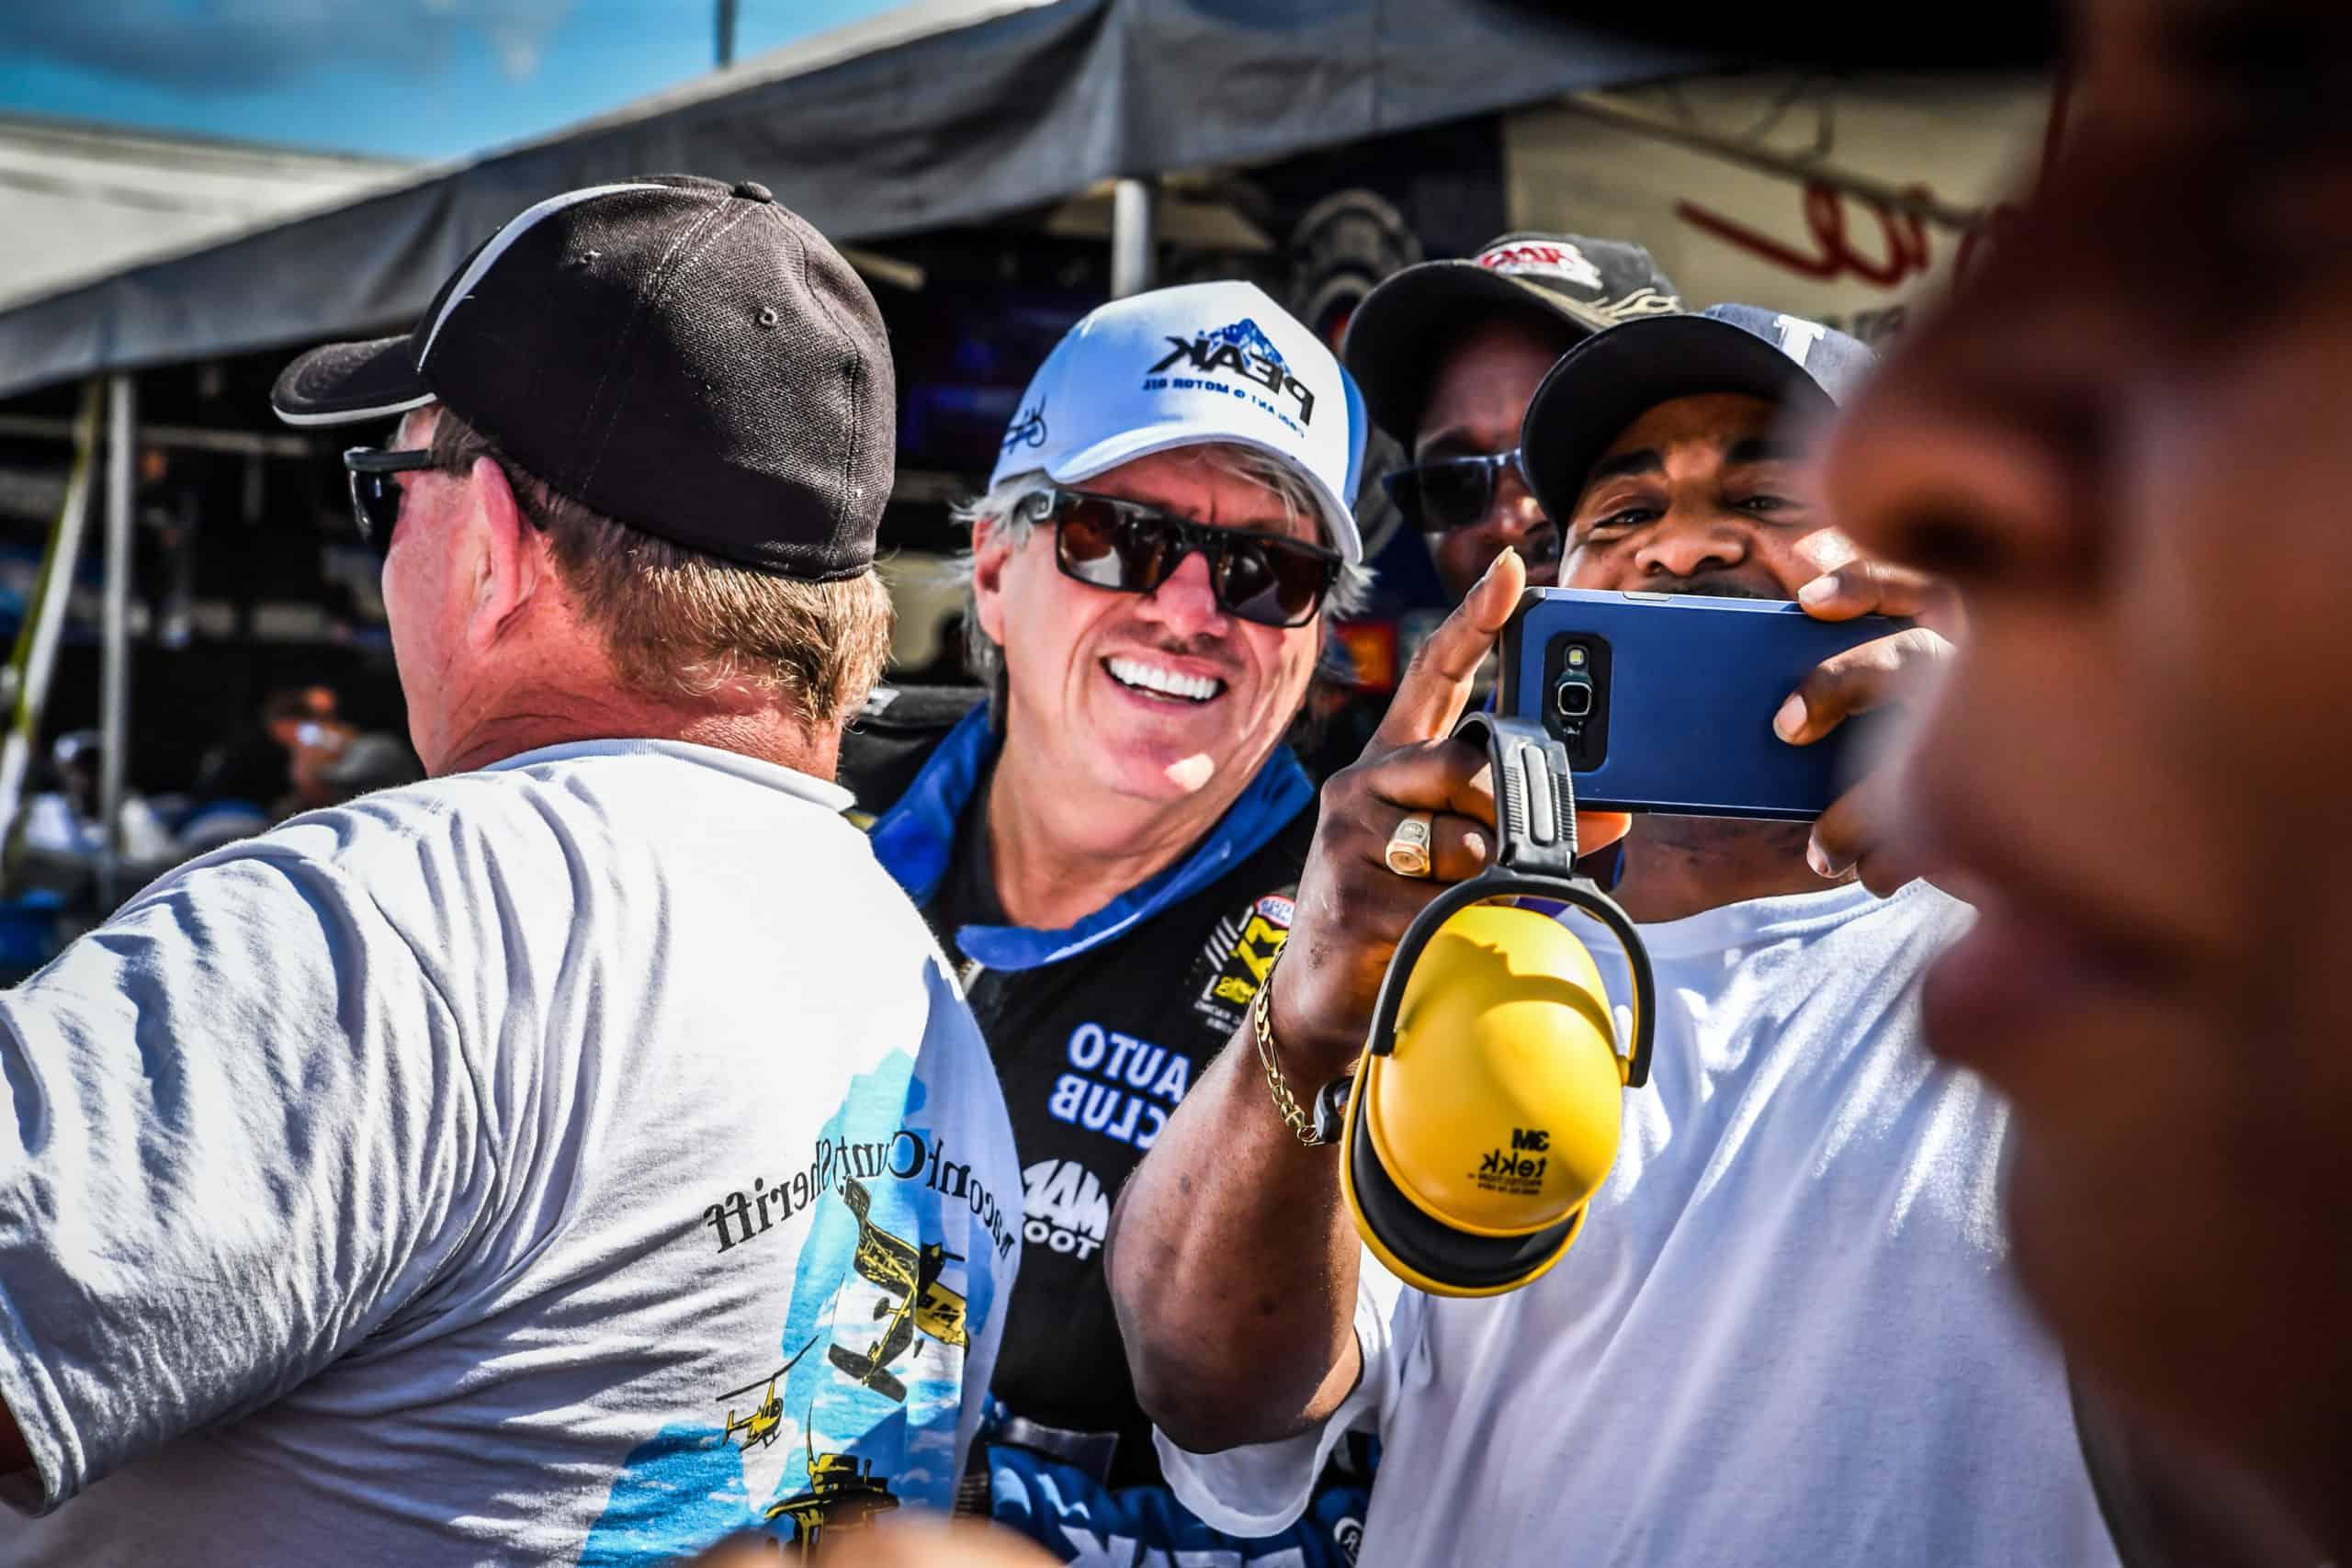 Race fans take a photo with driver, John Force